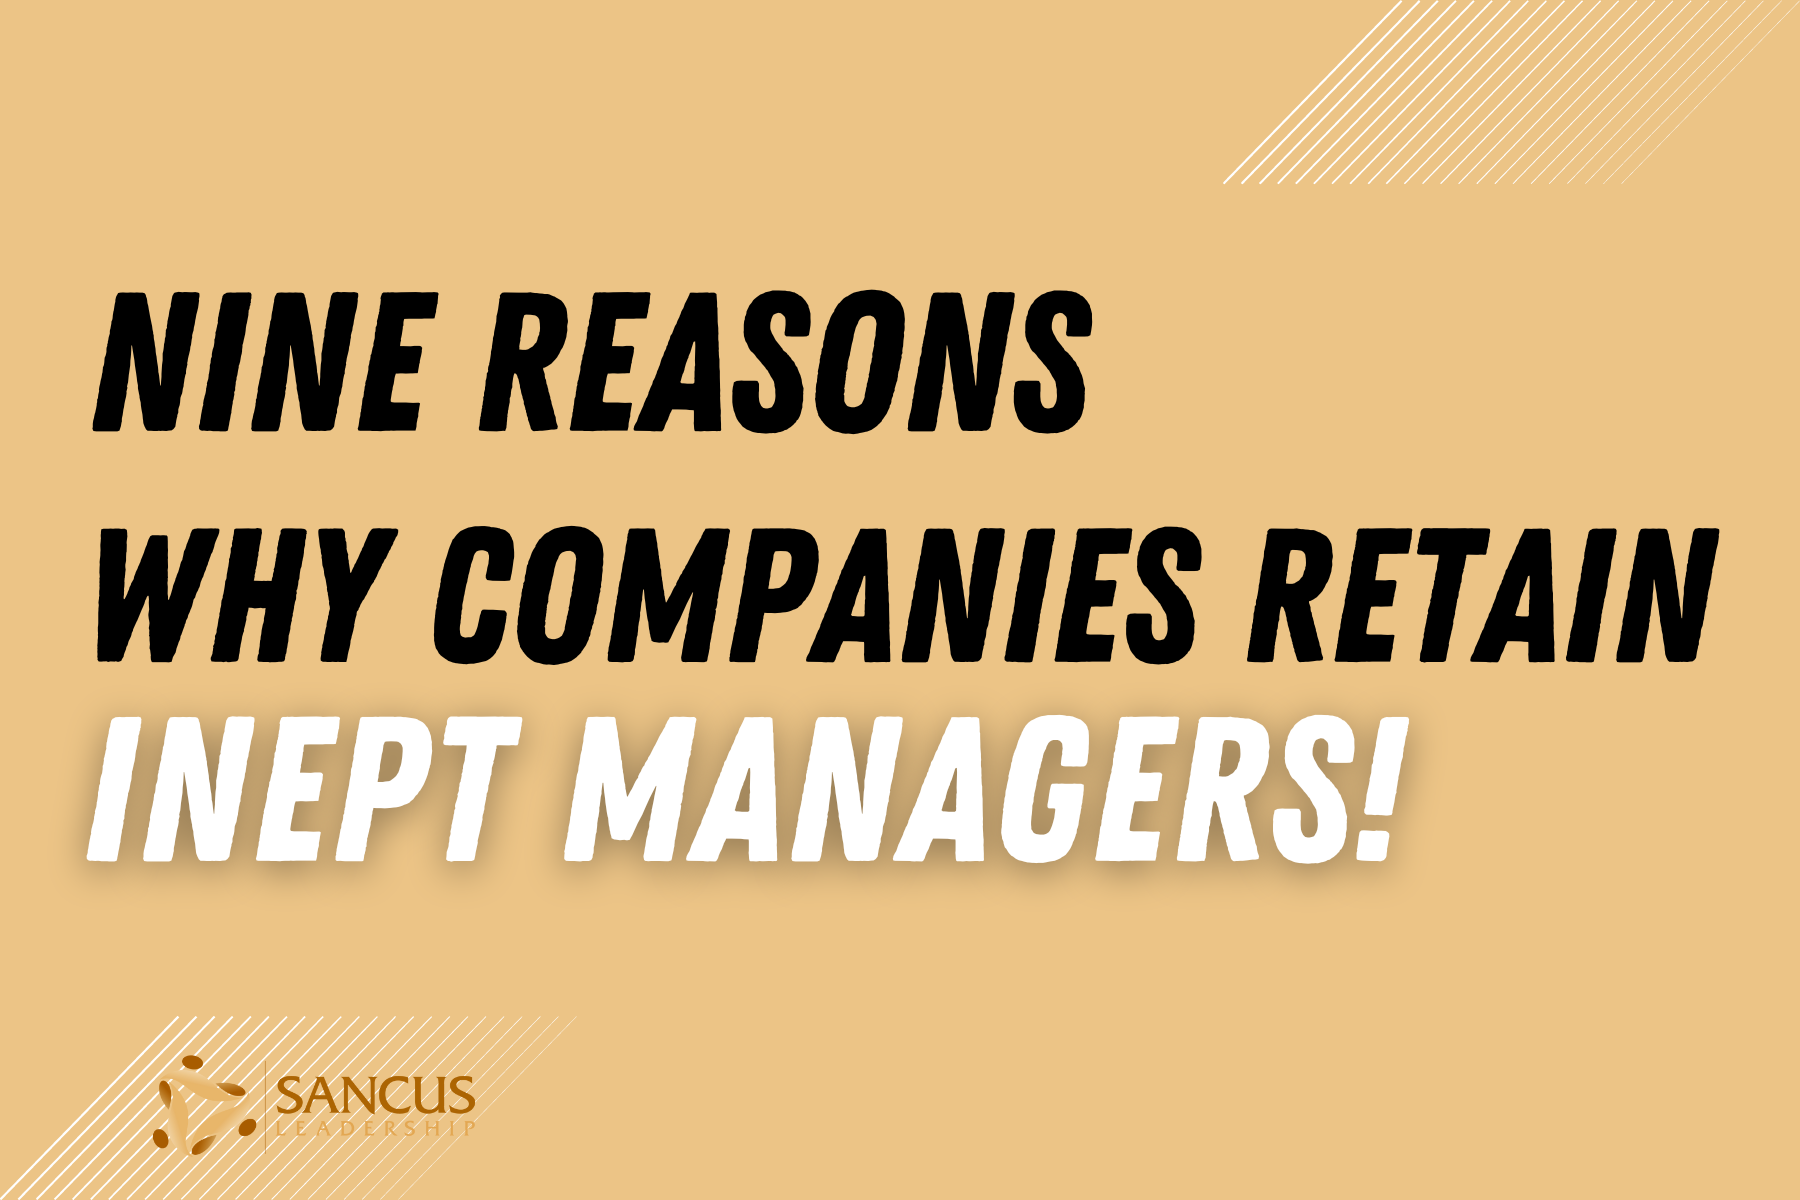 6 Reasons why some companies retain bad managers